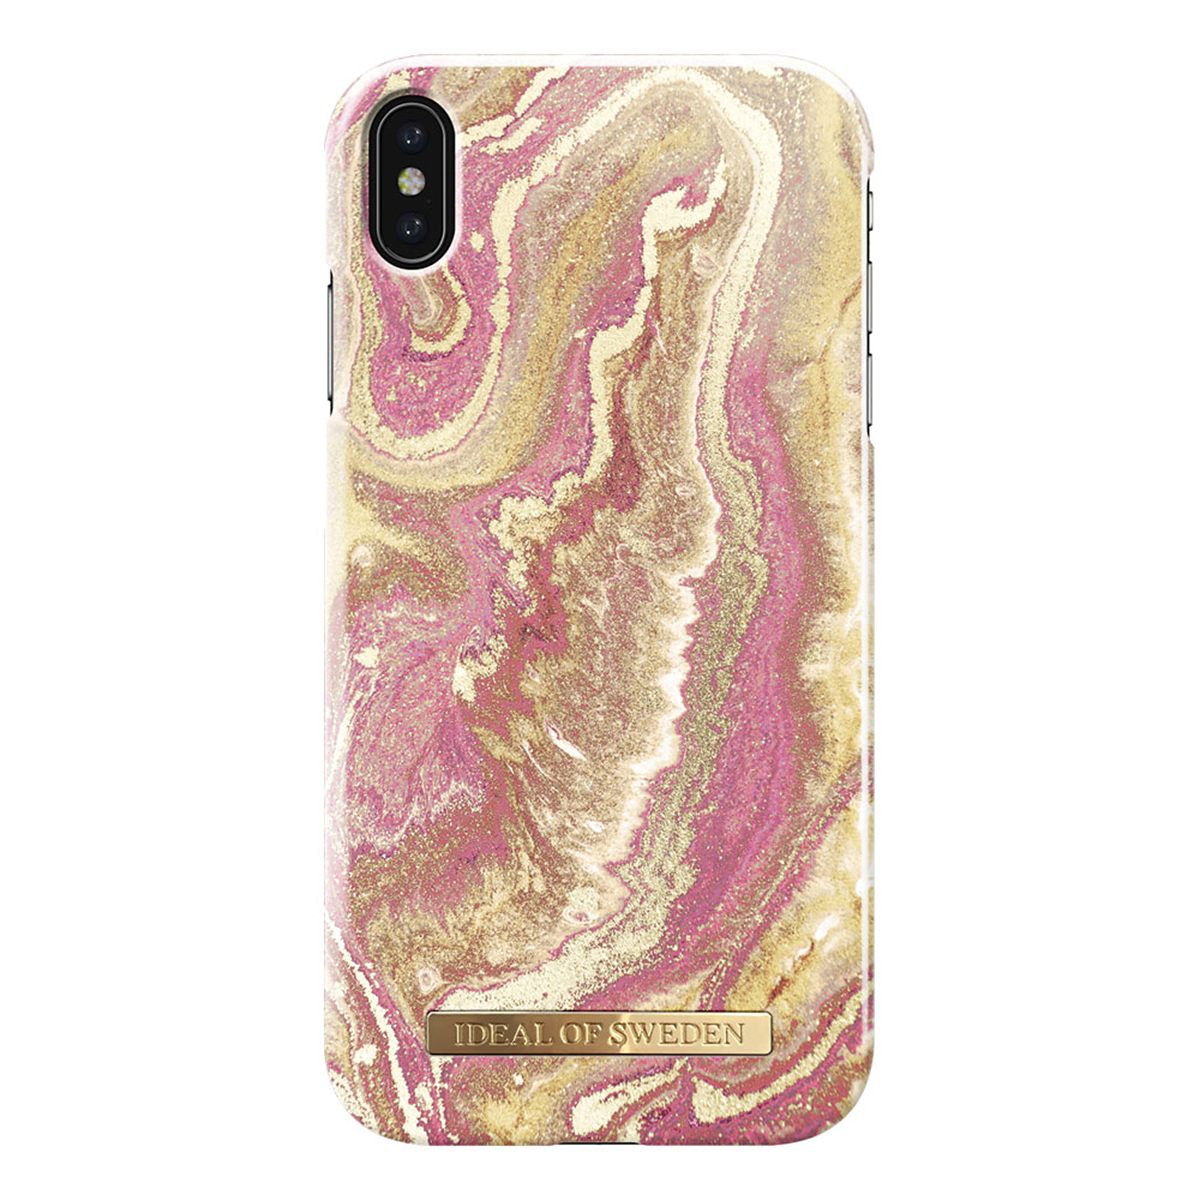 iDeal Fashion Case magnetskal iPhone XS Max, Golden Blush Marble